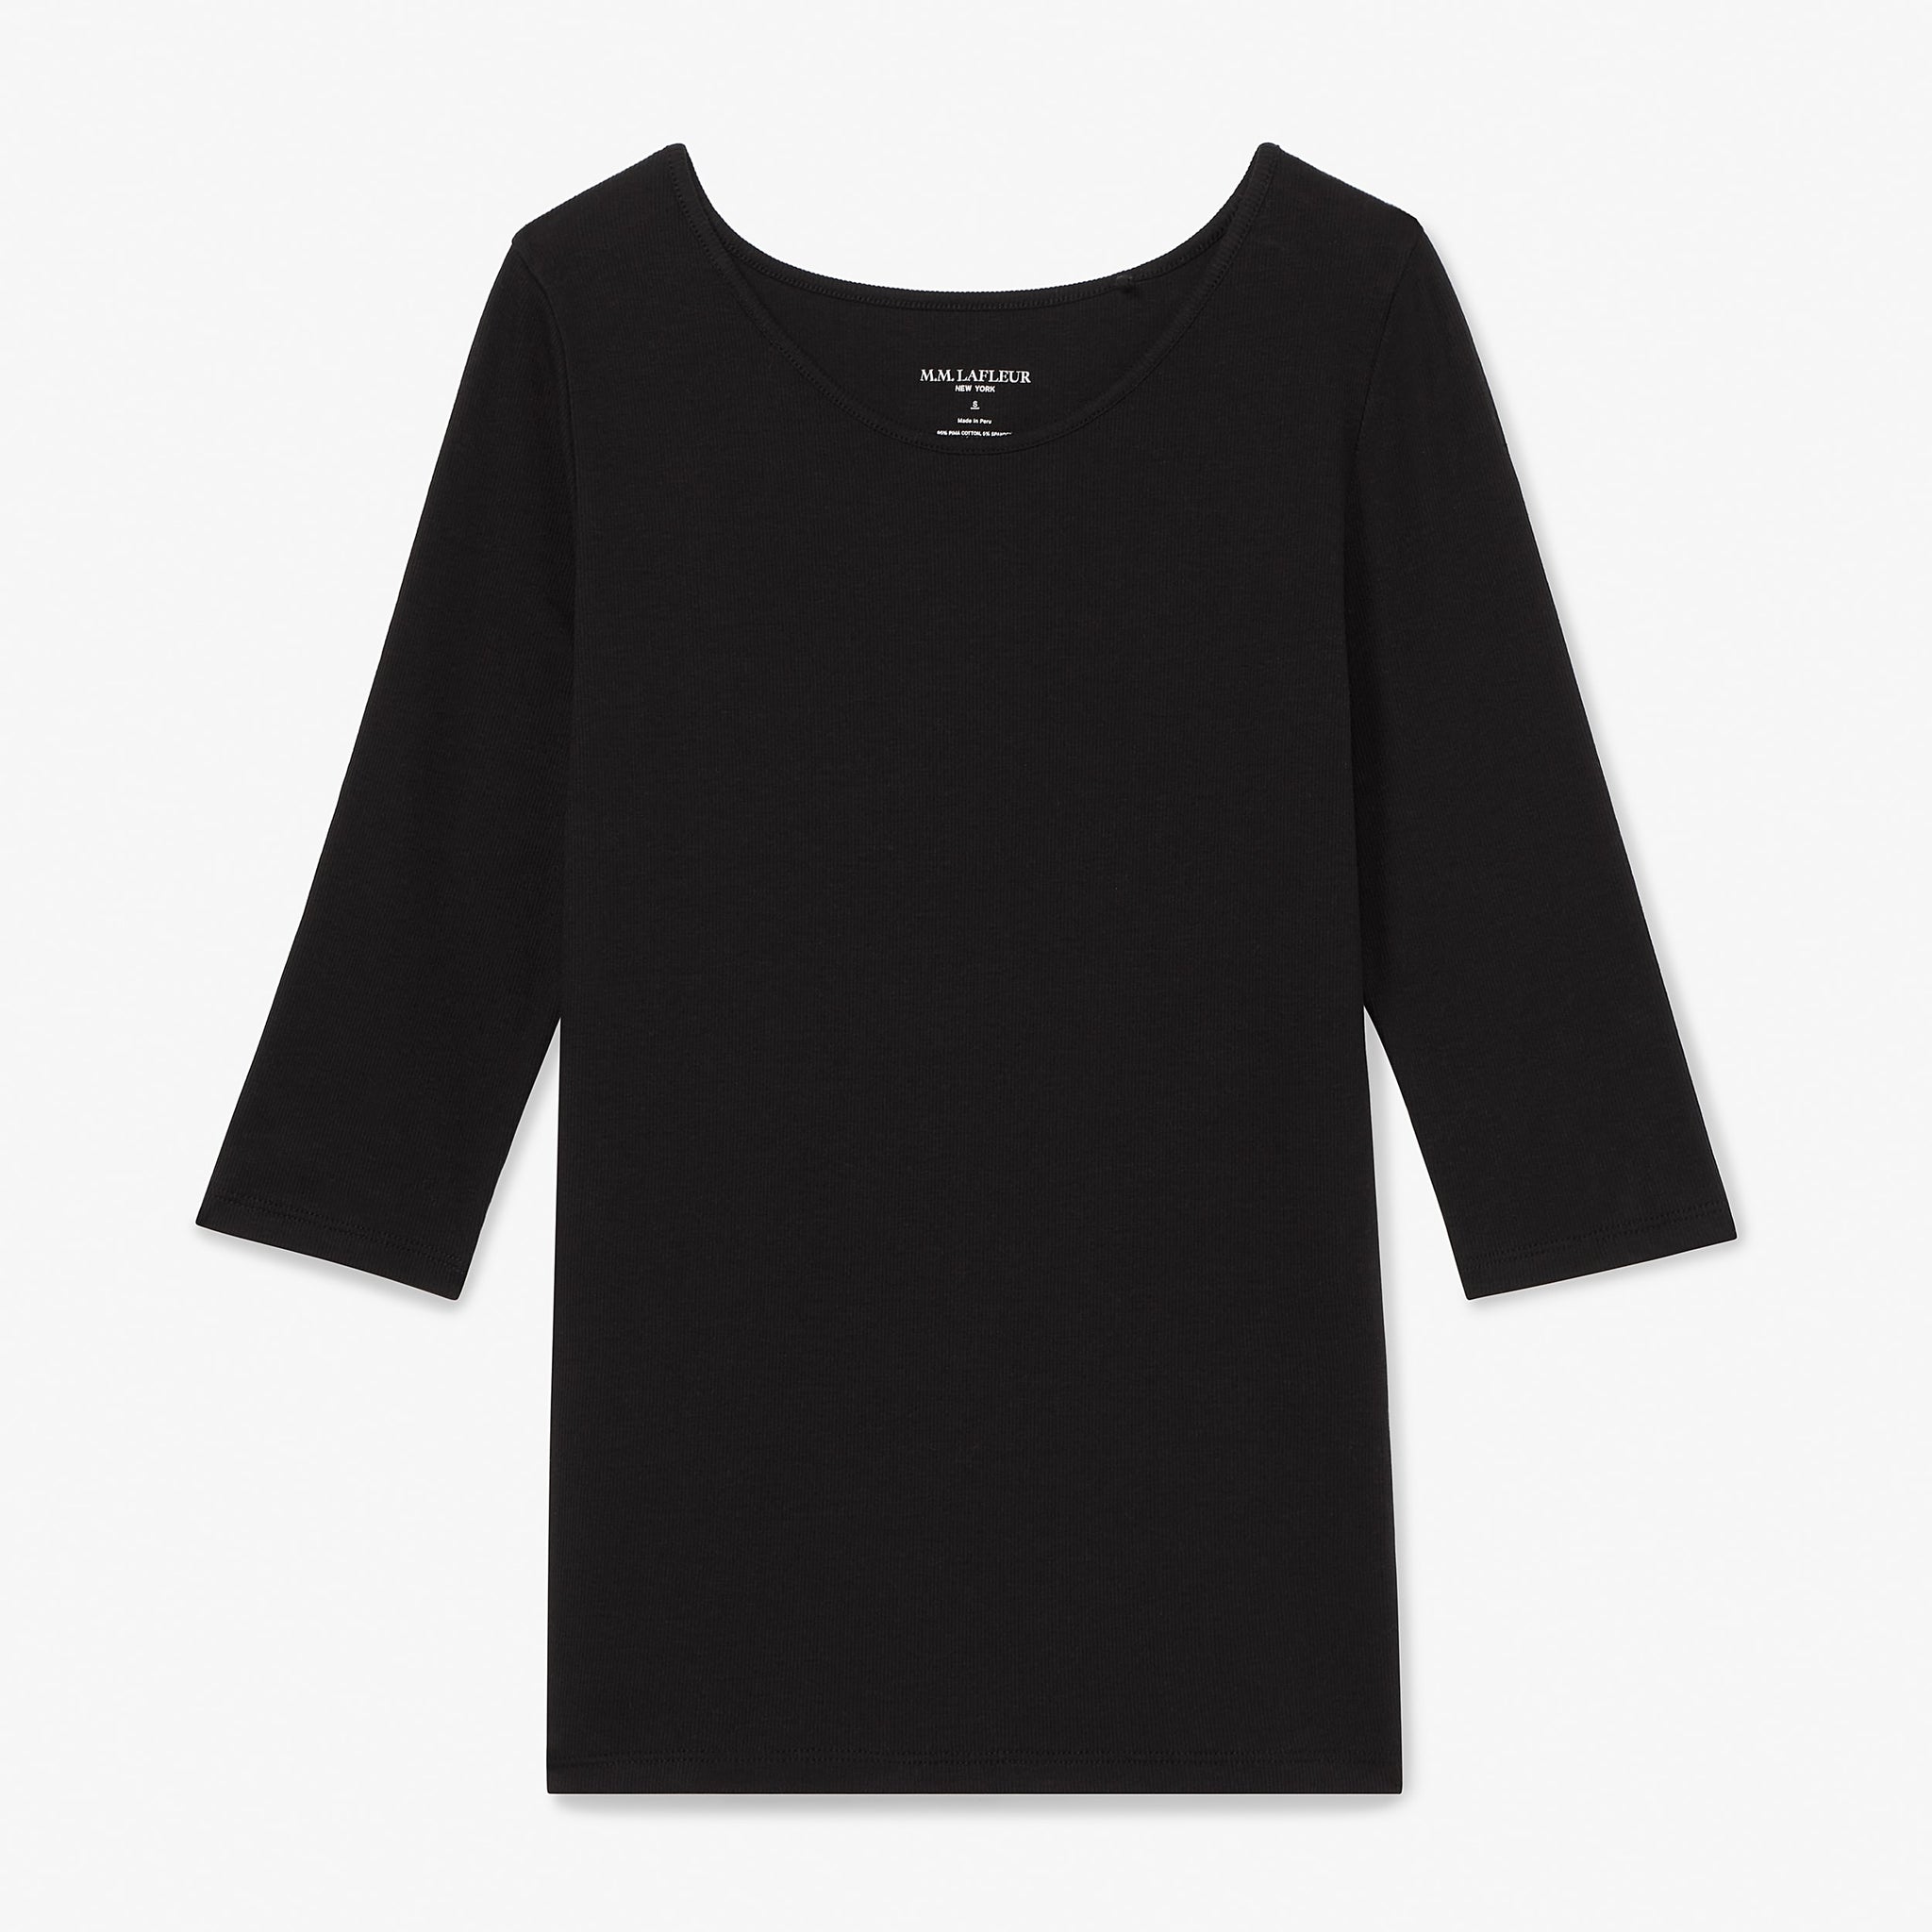 packshot image of the soyoung t-shirt in black